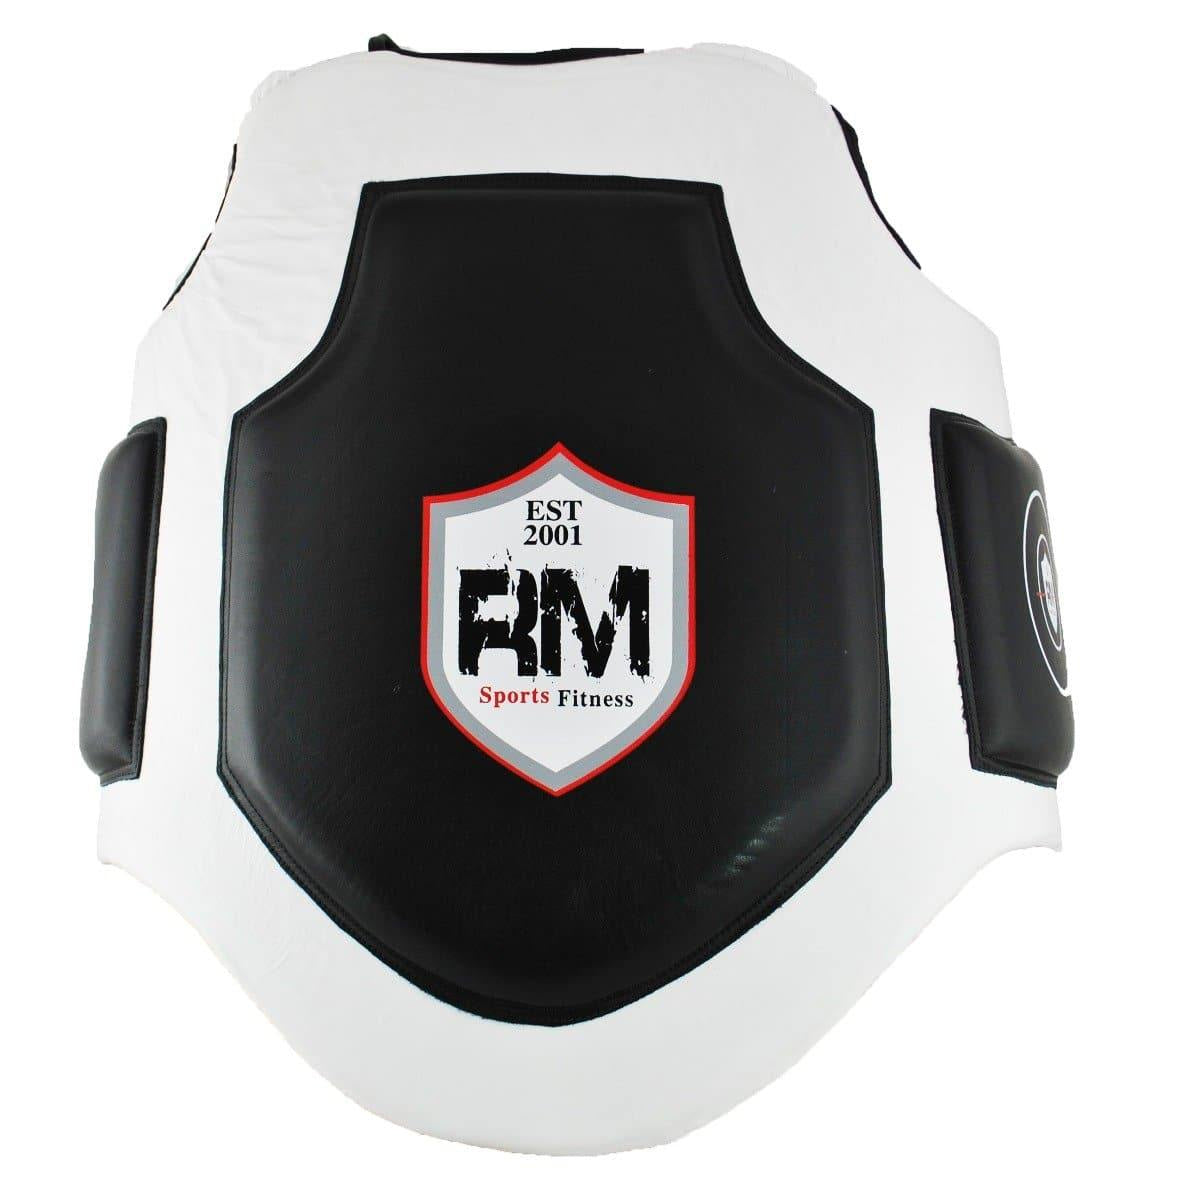 Black and White One-Size Synthetic Leather RingMaster Sports Body Protectors Image 1